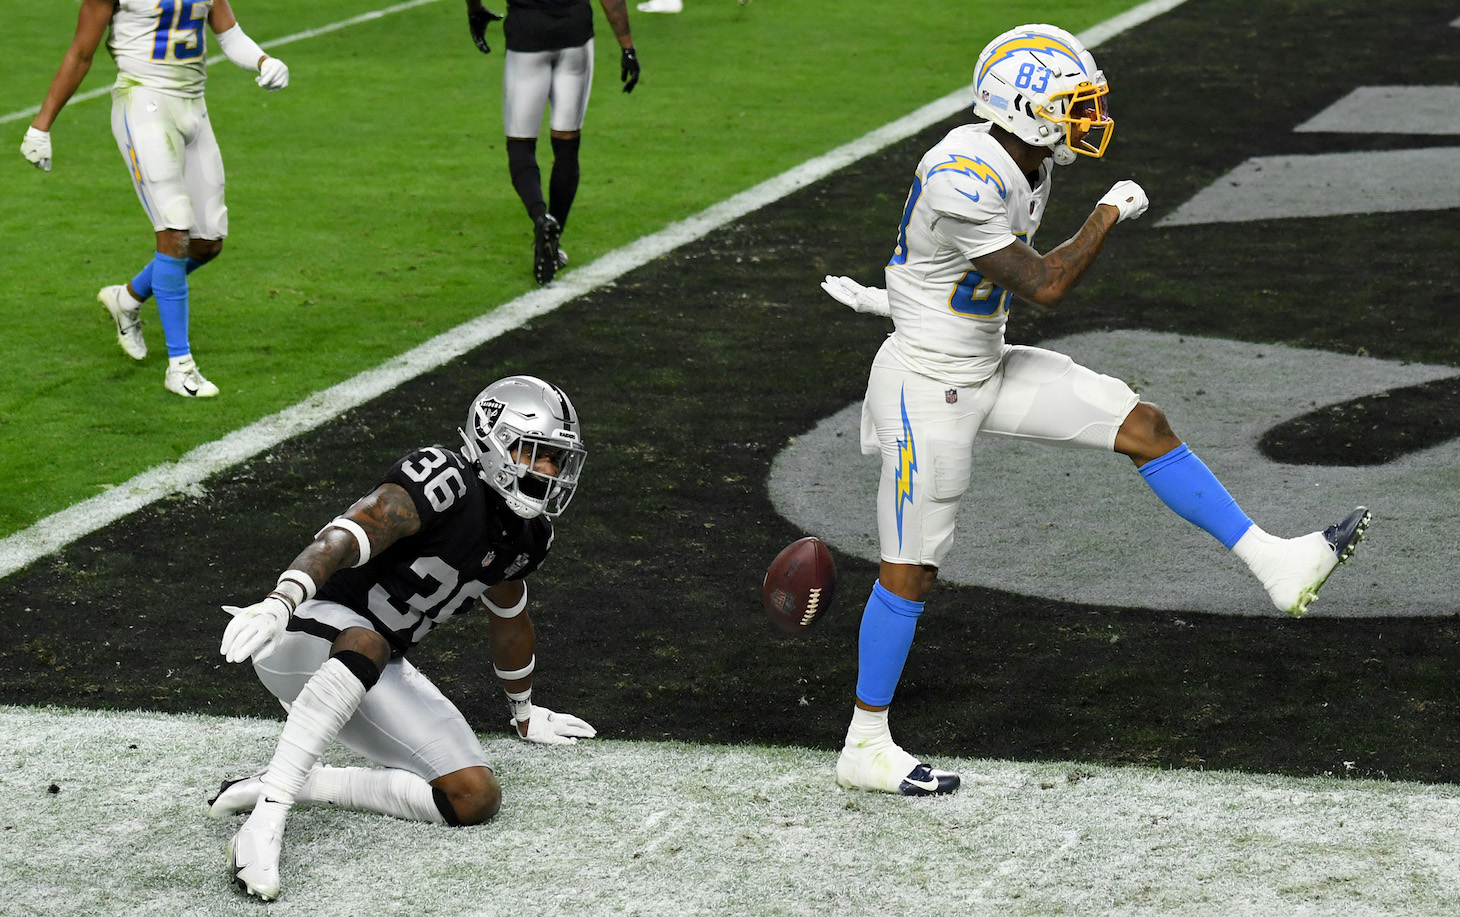 LAS VEGAS, NEVADA - DECEMBER 17: Wide receiver Tyron Johnson #83 of the Los Angeles Chargers celebrates after scoring a 26-yard touchdown against Daryl Worley #36 of the Las Vegas Raiders during the first half of their game at Allegiant Stadium on December 17, 2020 in Las Vegas, Nevada. The Chargers defeated the Raiders 30-27 in overtime. (Photo by Ethan Miller/Getty Images)